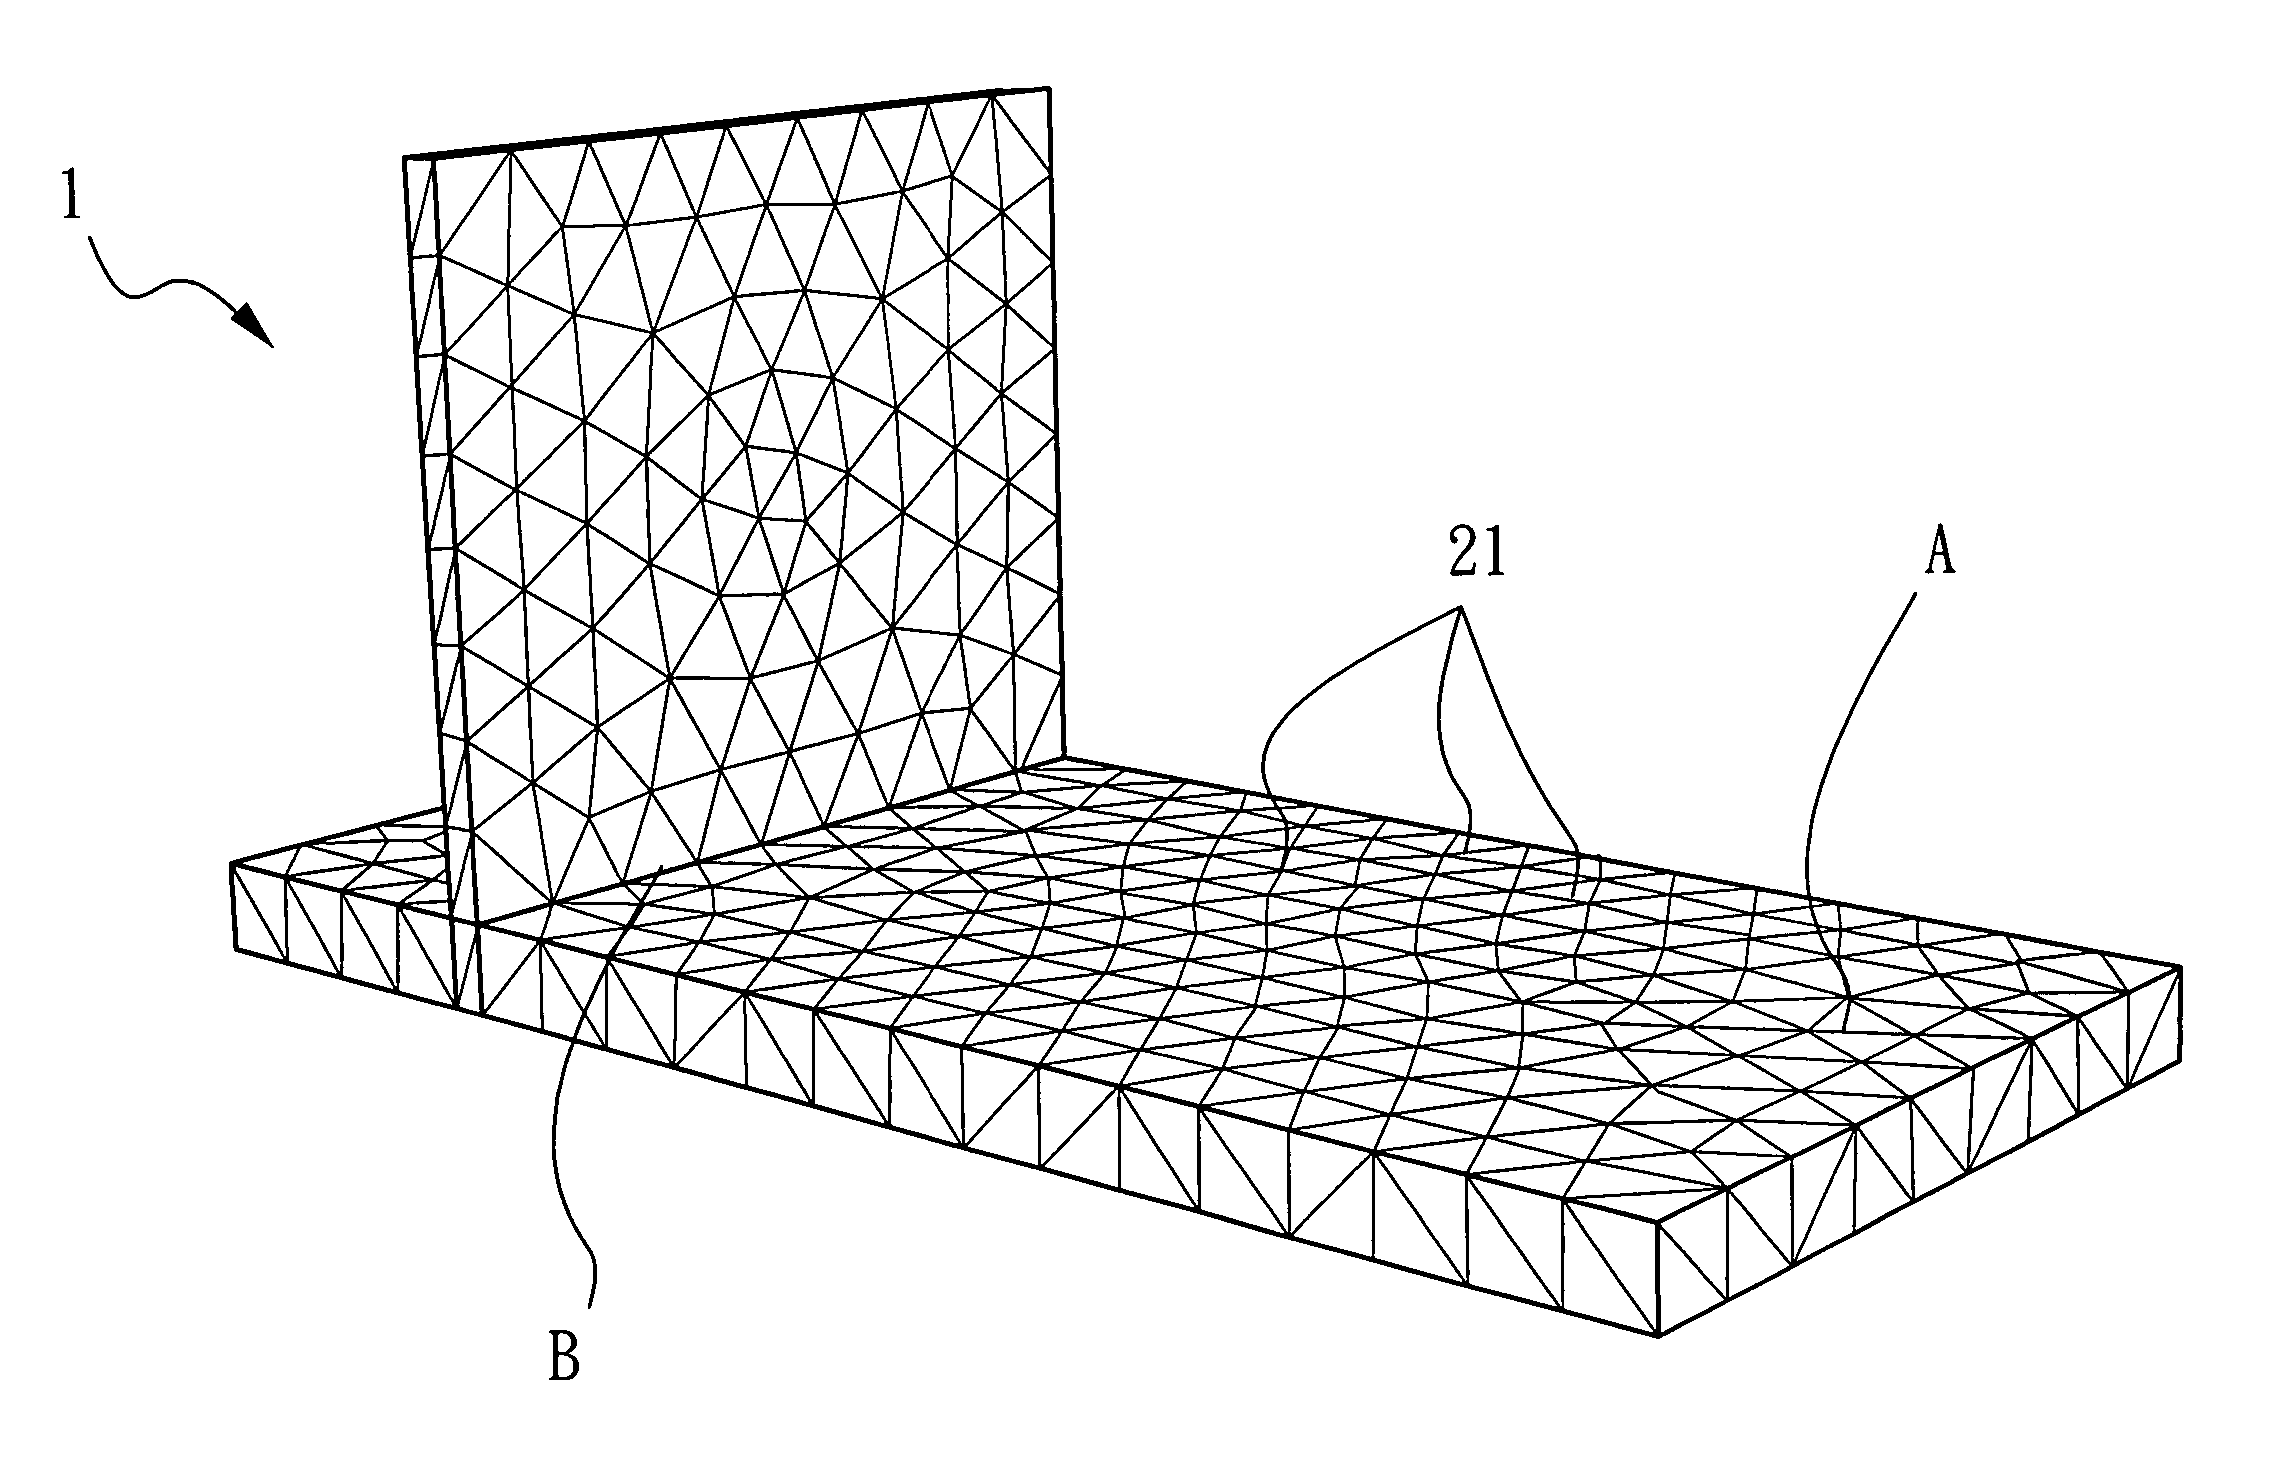 Automated mesh creation method for injection molding flow simulation